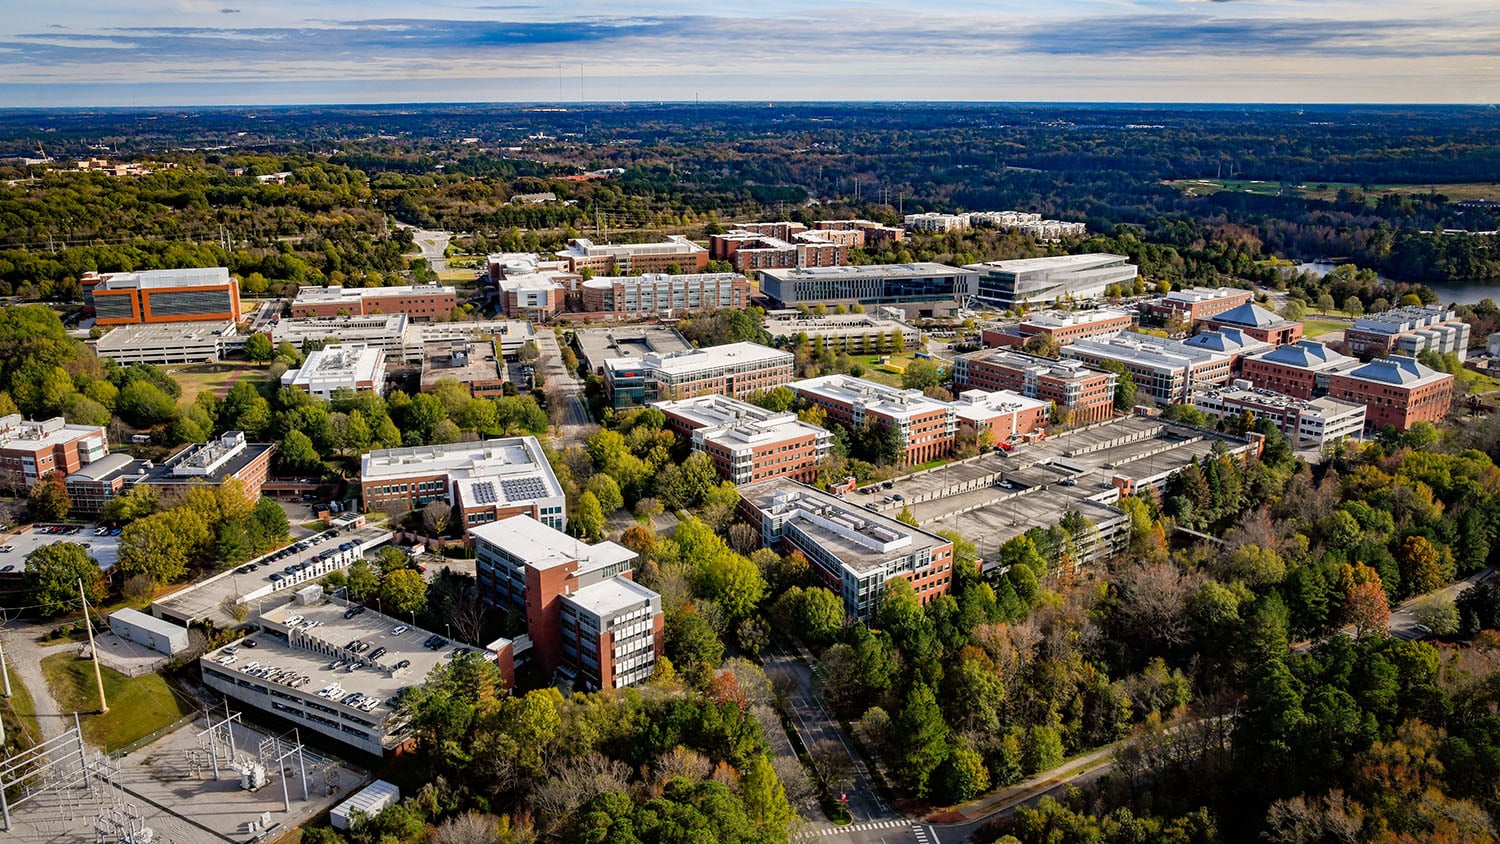 Aerial view of entire Centennial Campus, with trees sprawling to the horizon under a cloudy sky in the background.